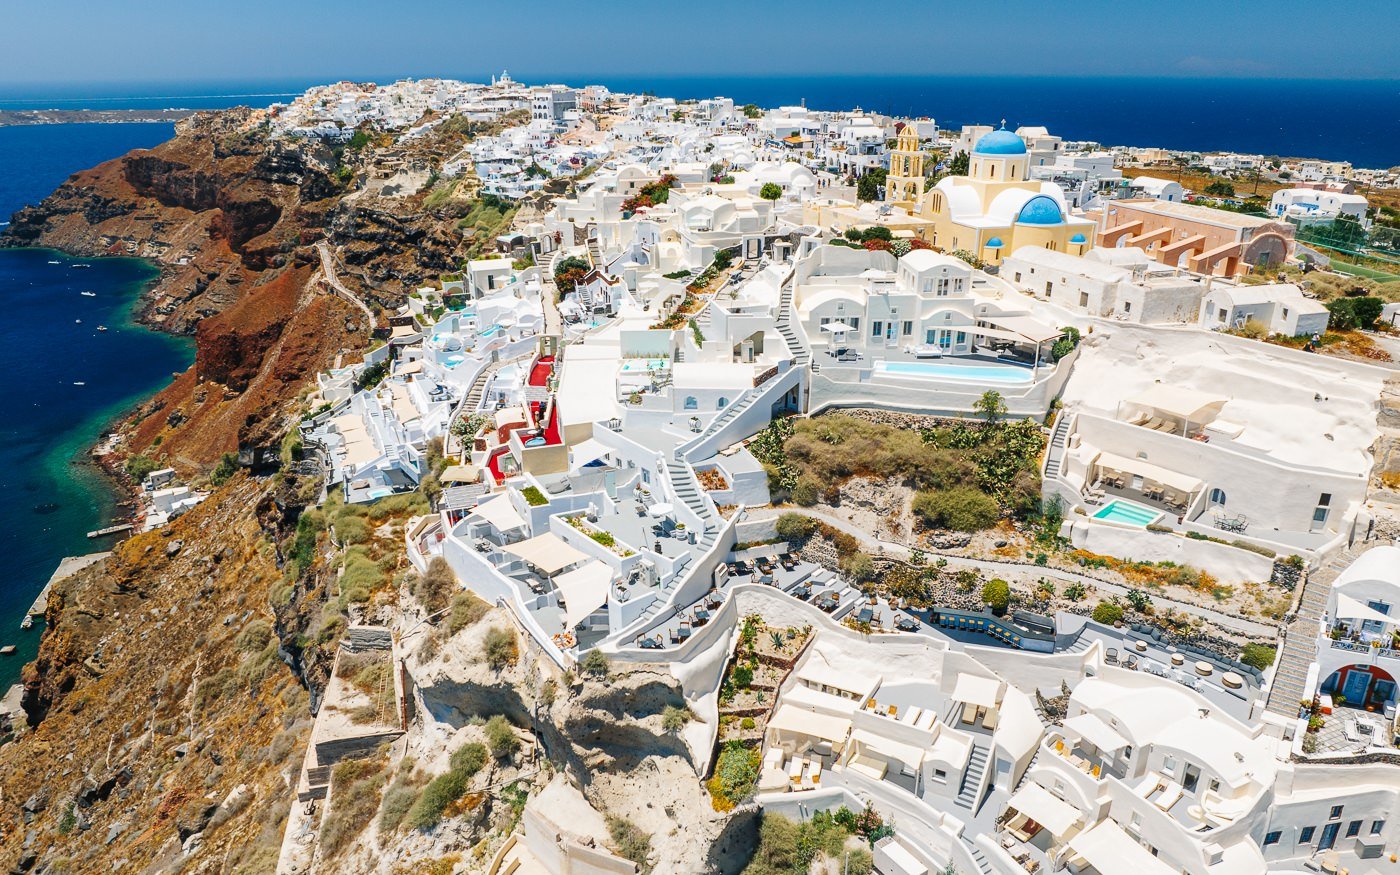 11 Best Places to Stay in Oia Santorini – Top Hotels in 2023